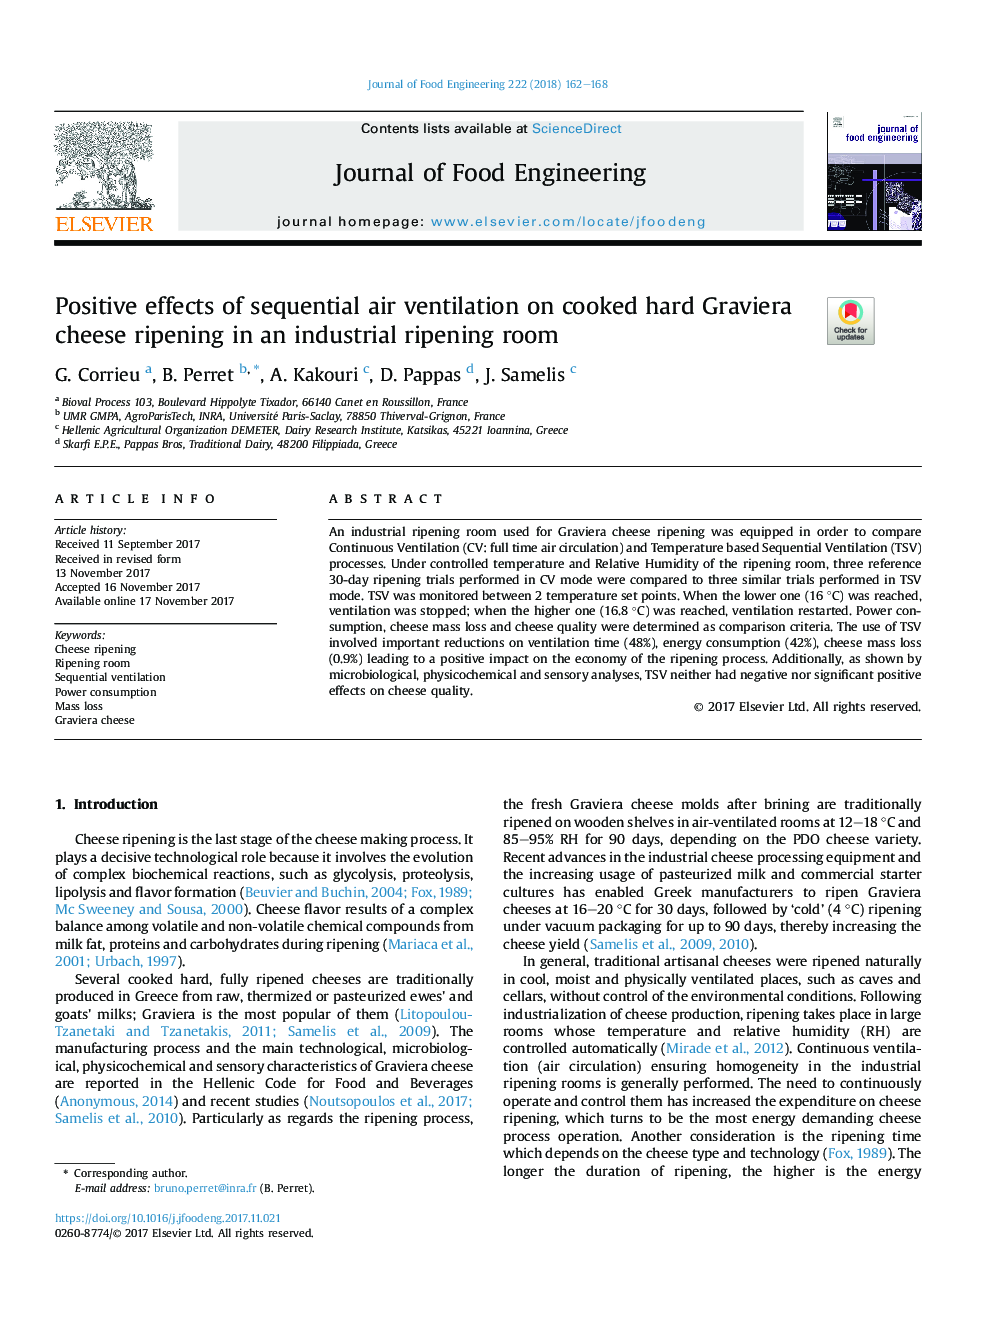 Positive effects of sequential air ventilation on cooked hard Graviera cheese ripening in an industrial ripening room